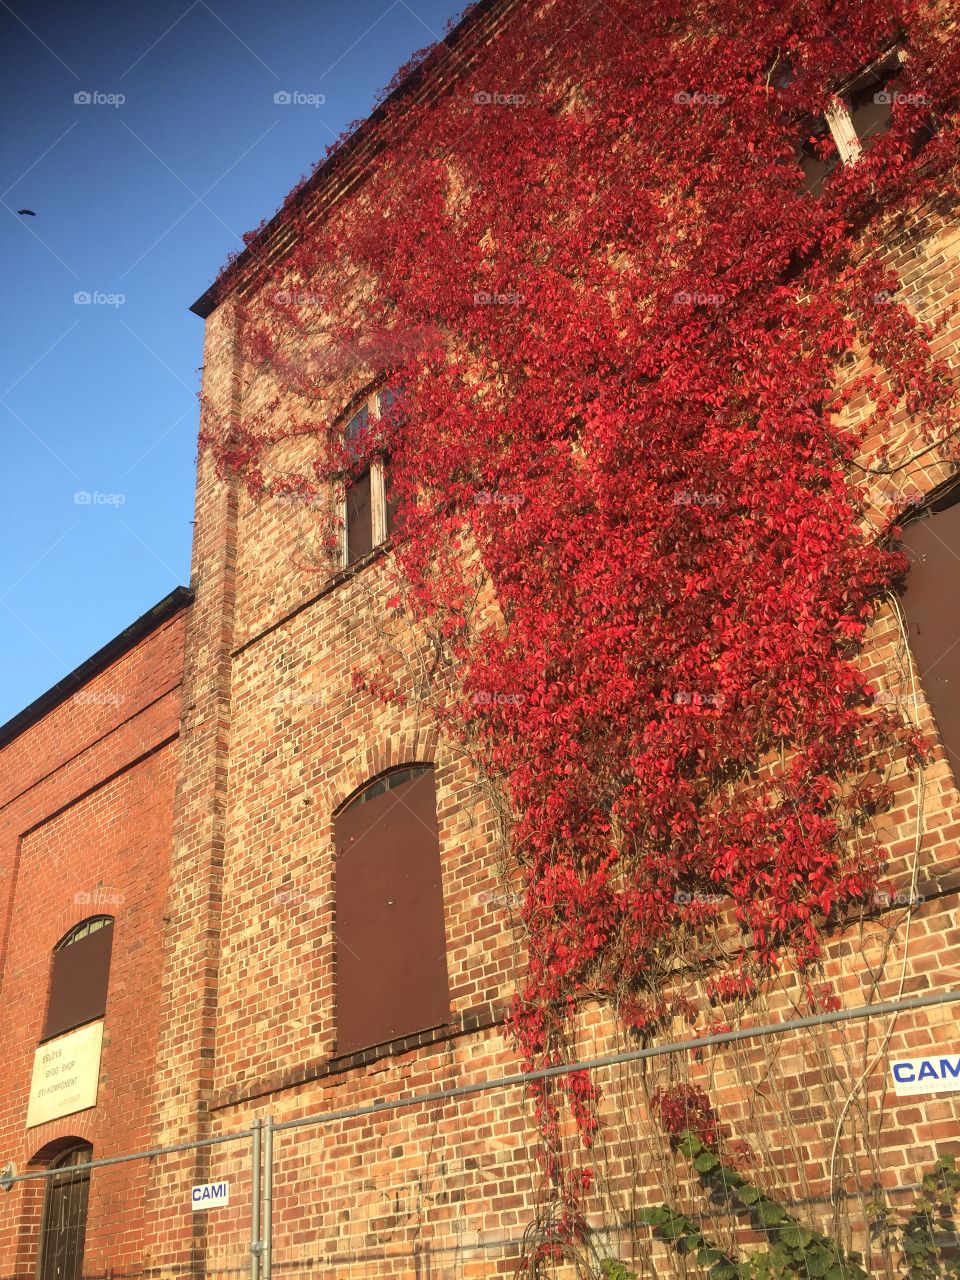 Autumn leaves on a brick wall